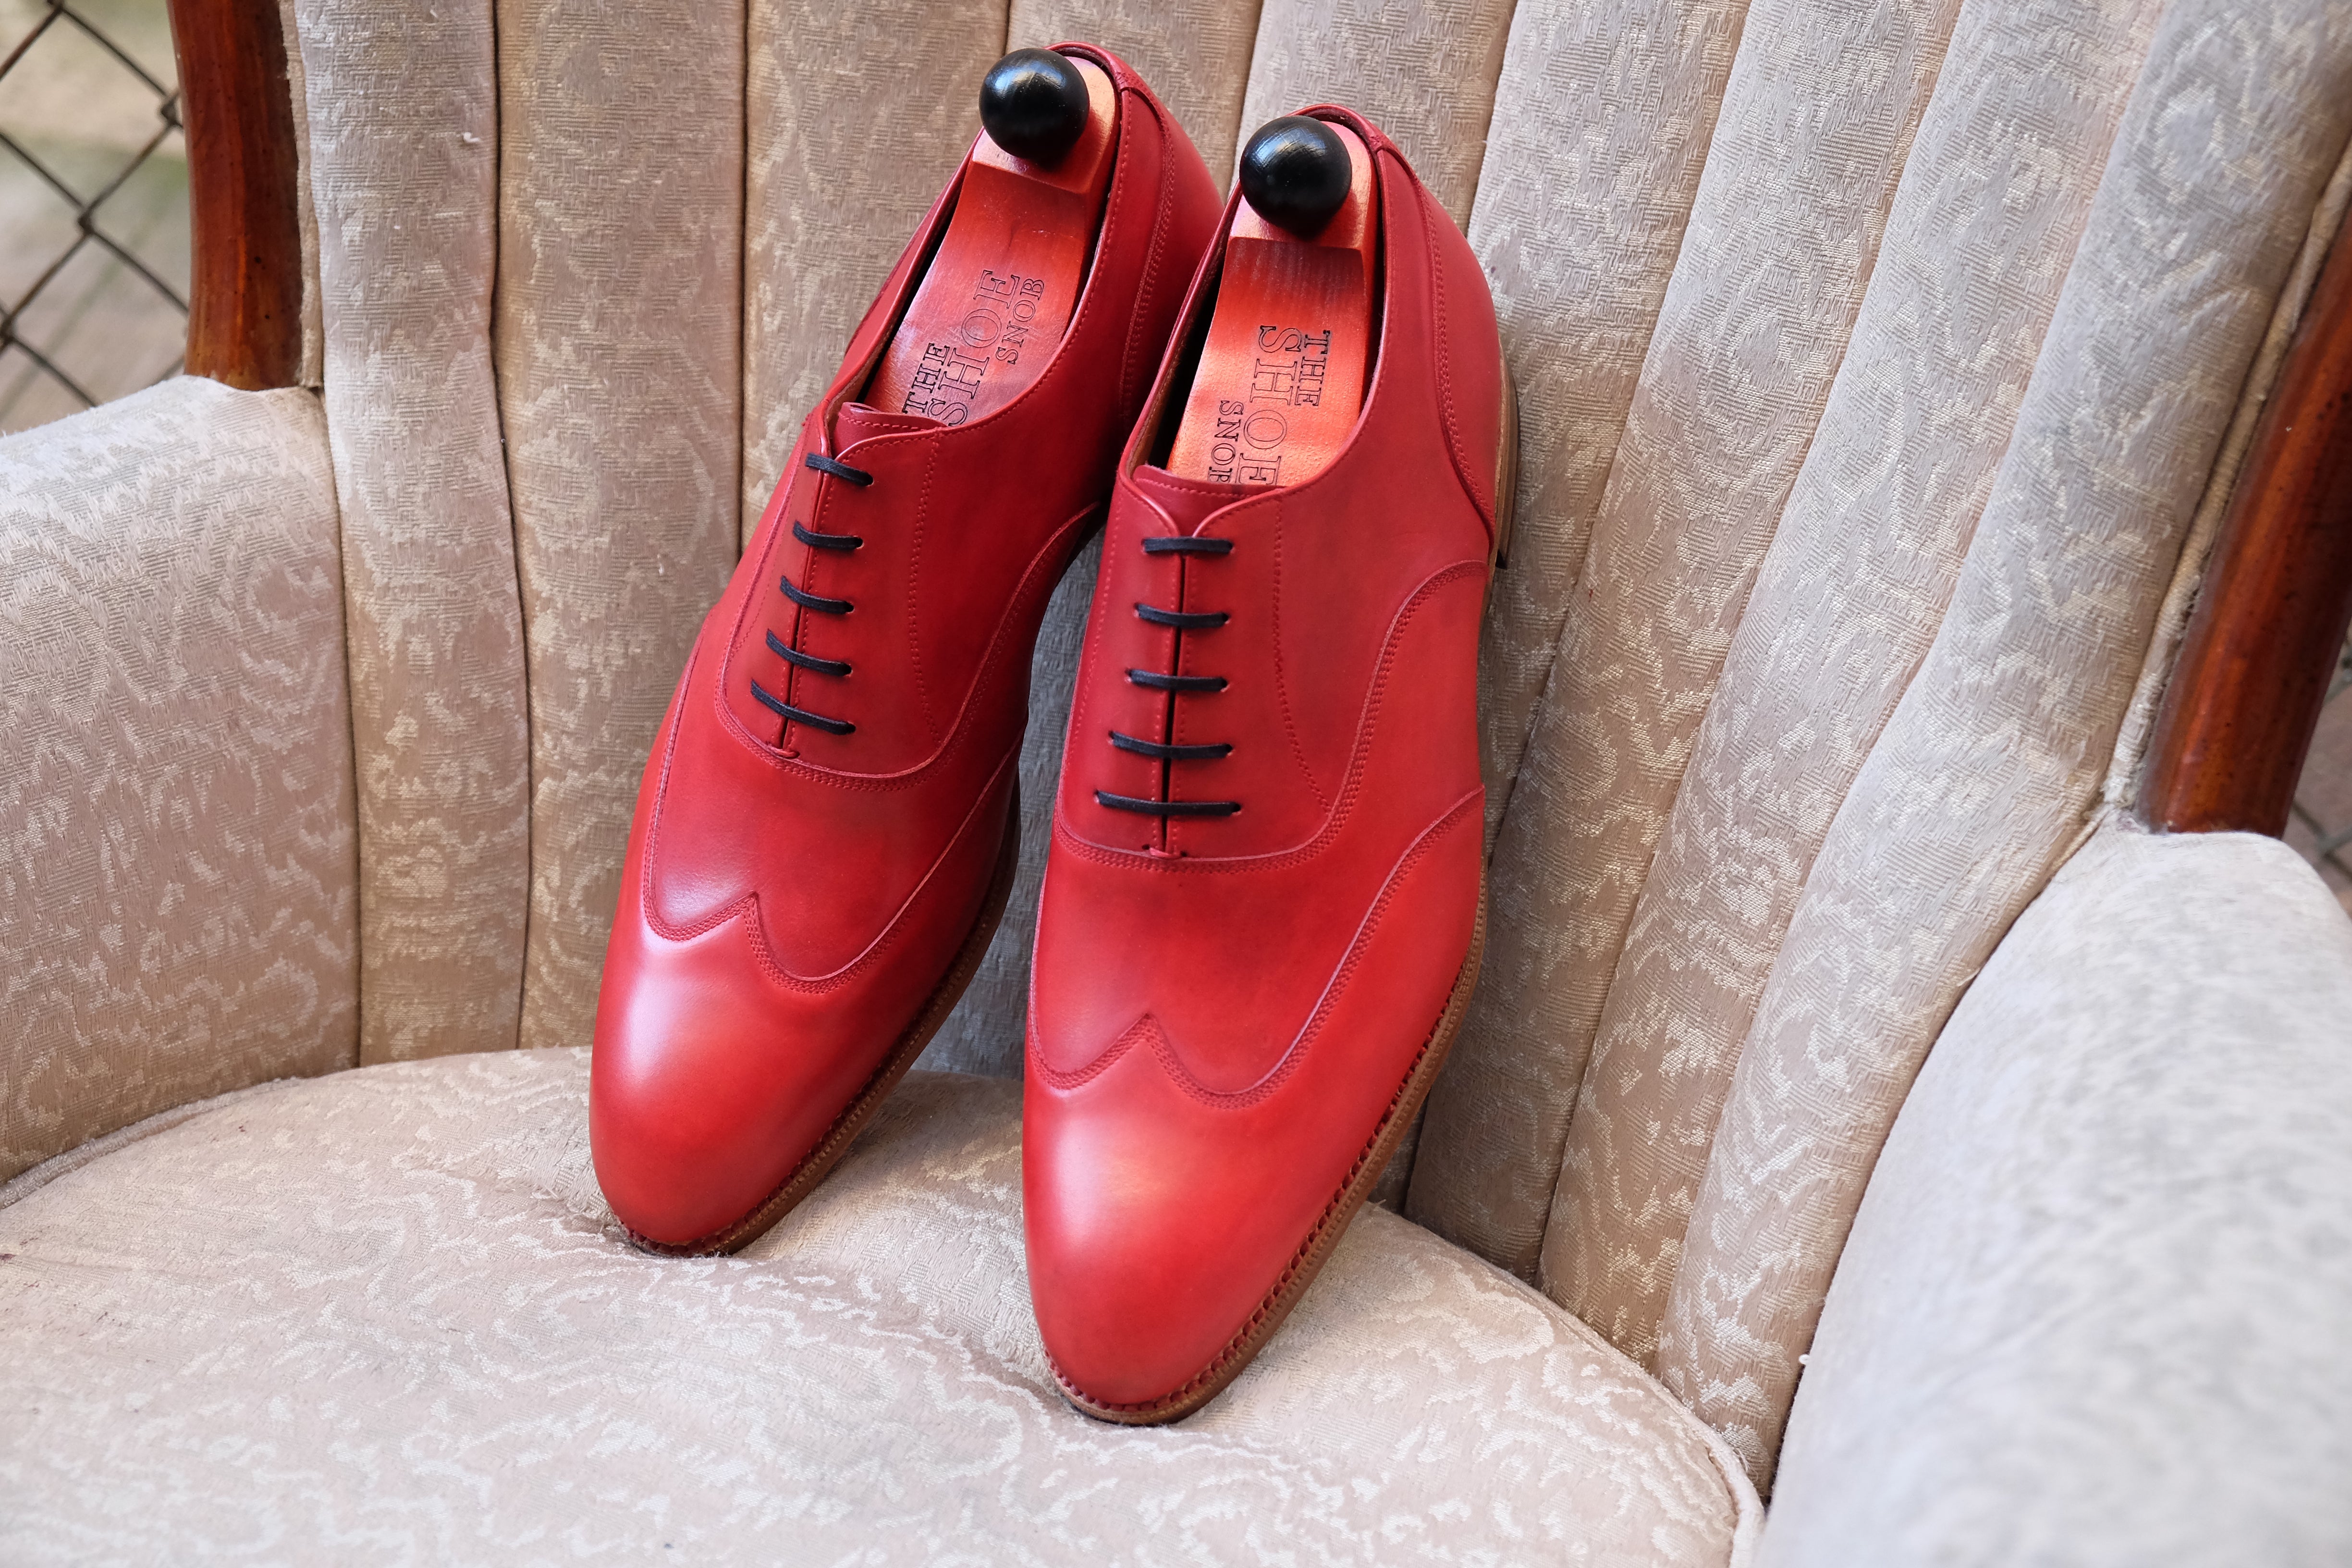 Pullman - MTO - Unfinished Red Calf - NGT Last - Natural Single Leather Sole